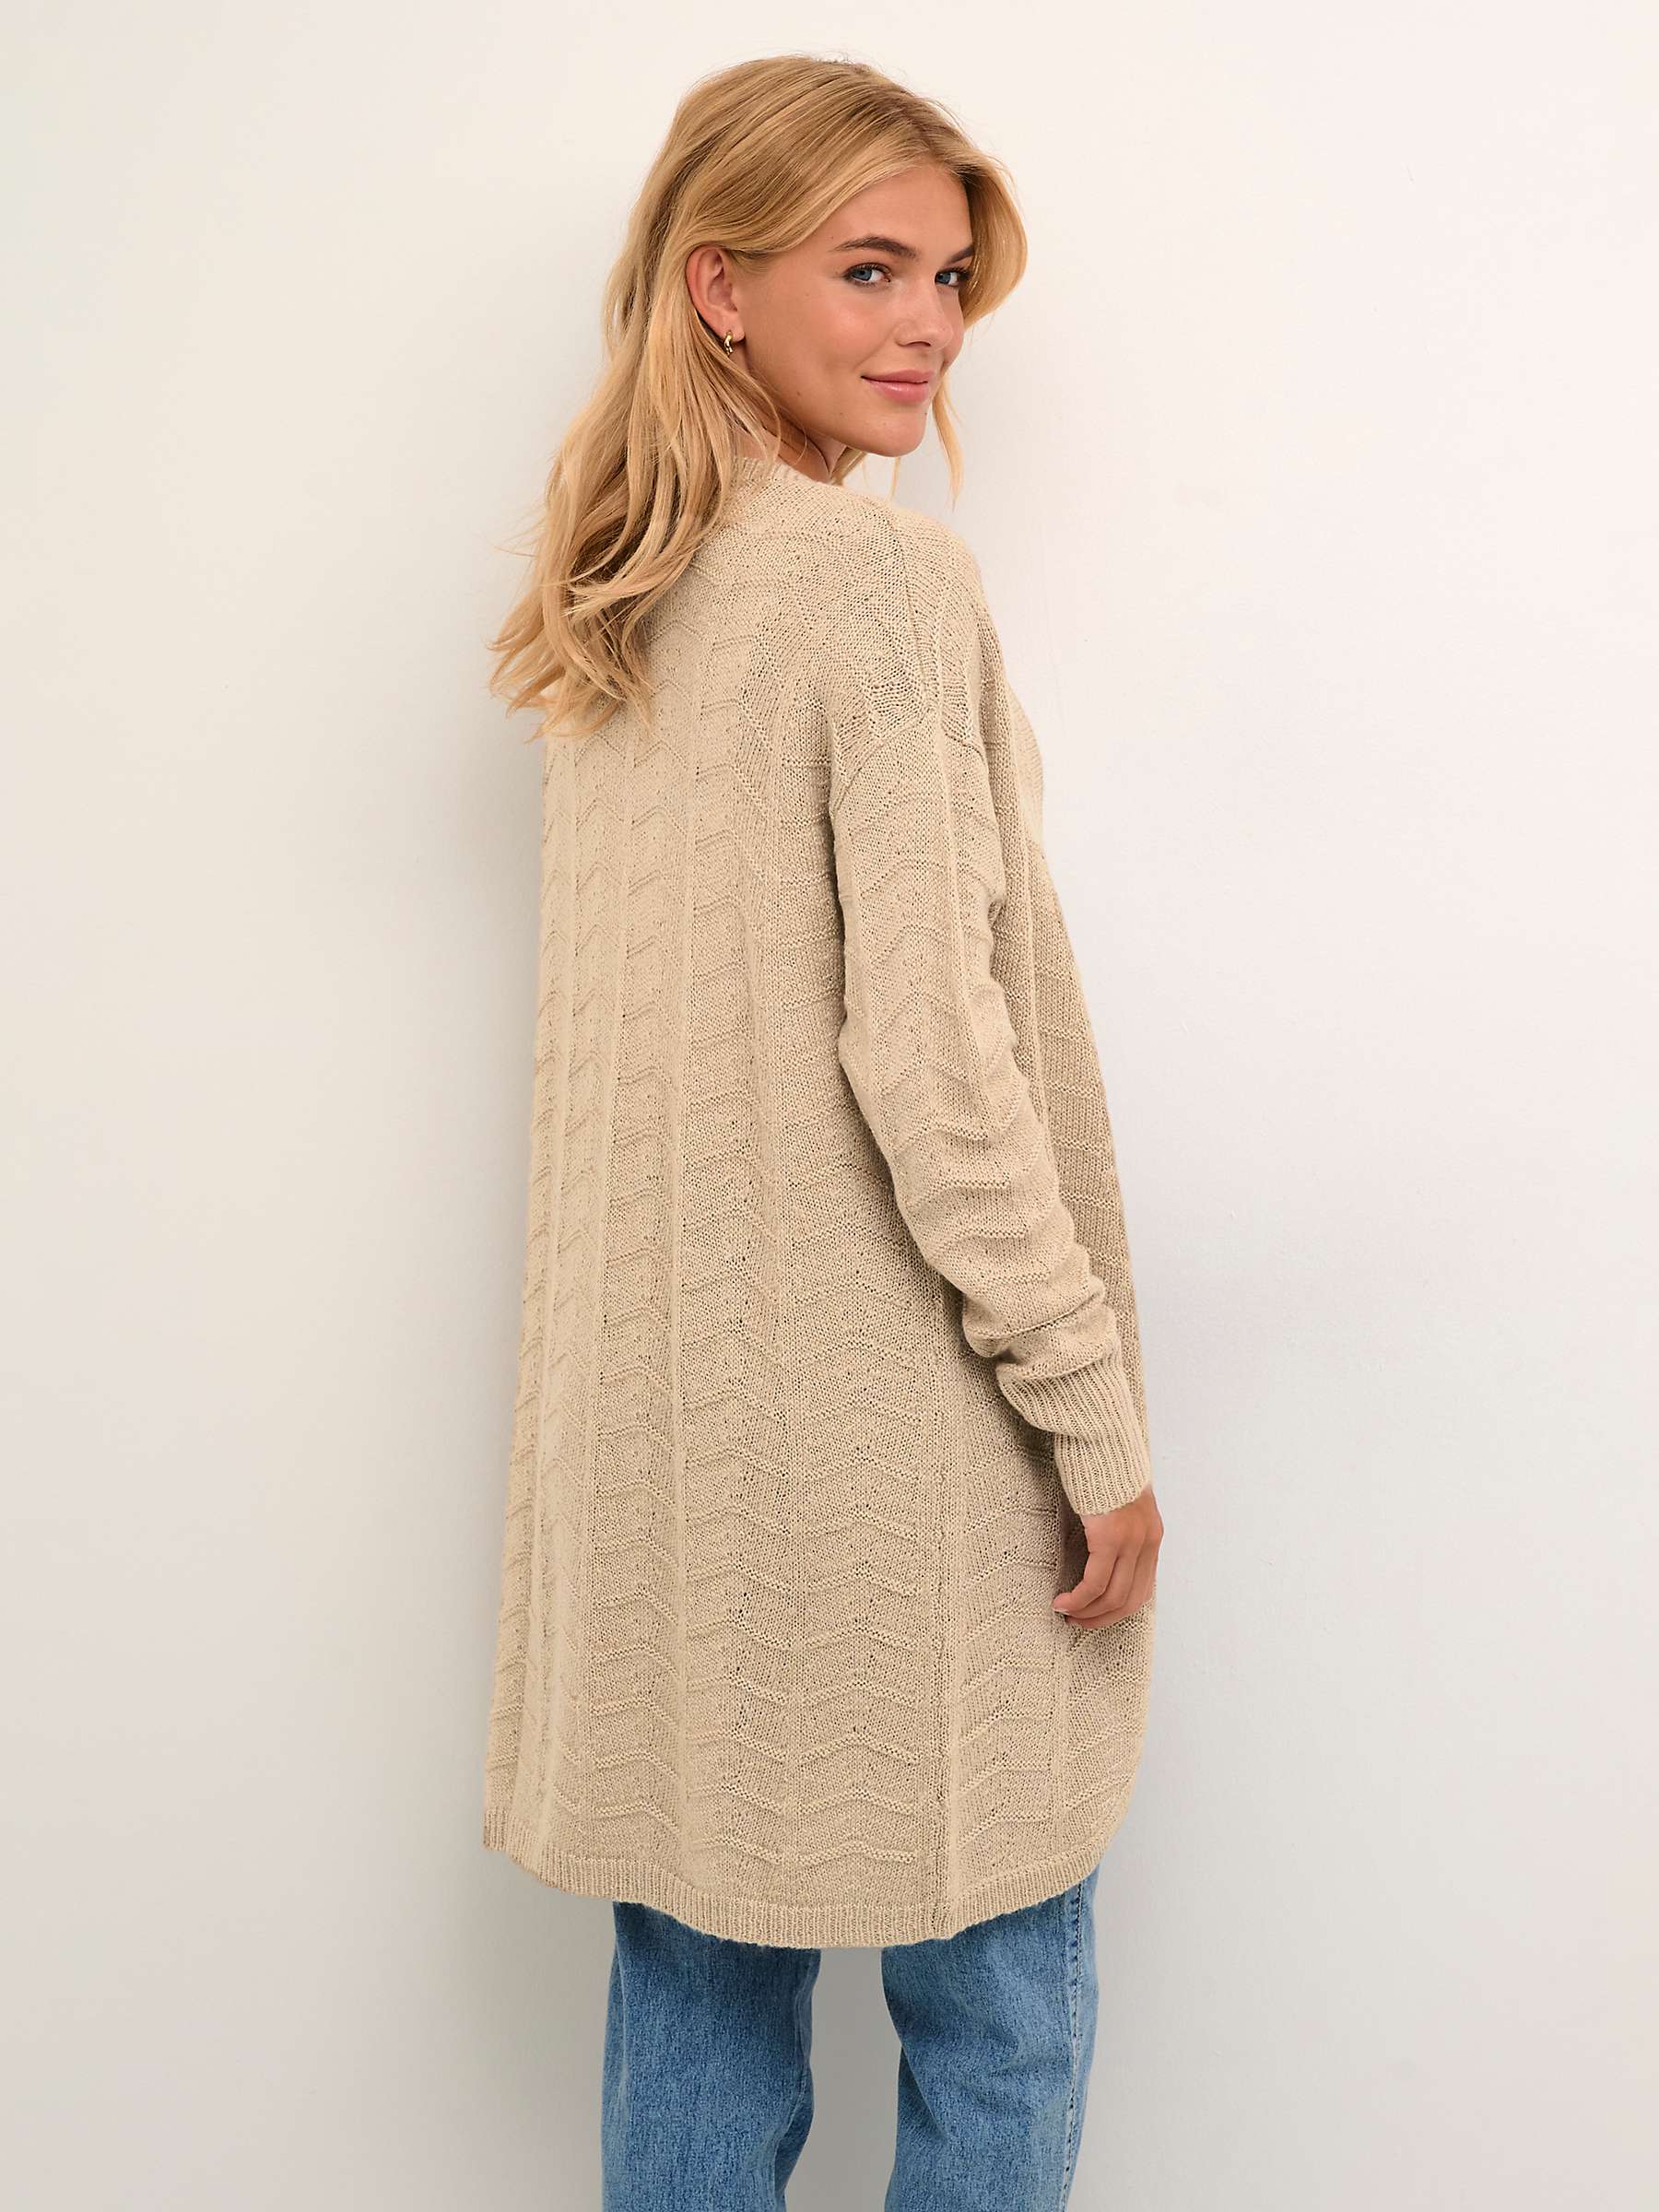 Buy KAFFE Emria Knit Cardigan, Feather Gray Online at johnlewis.com